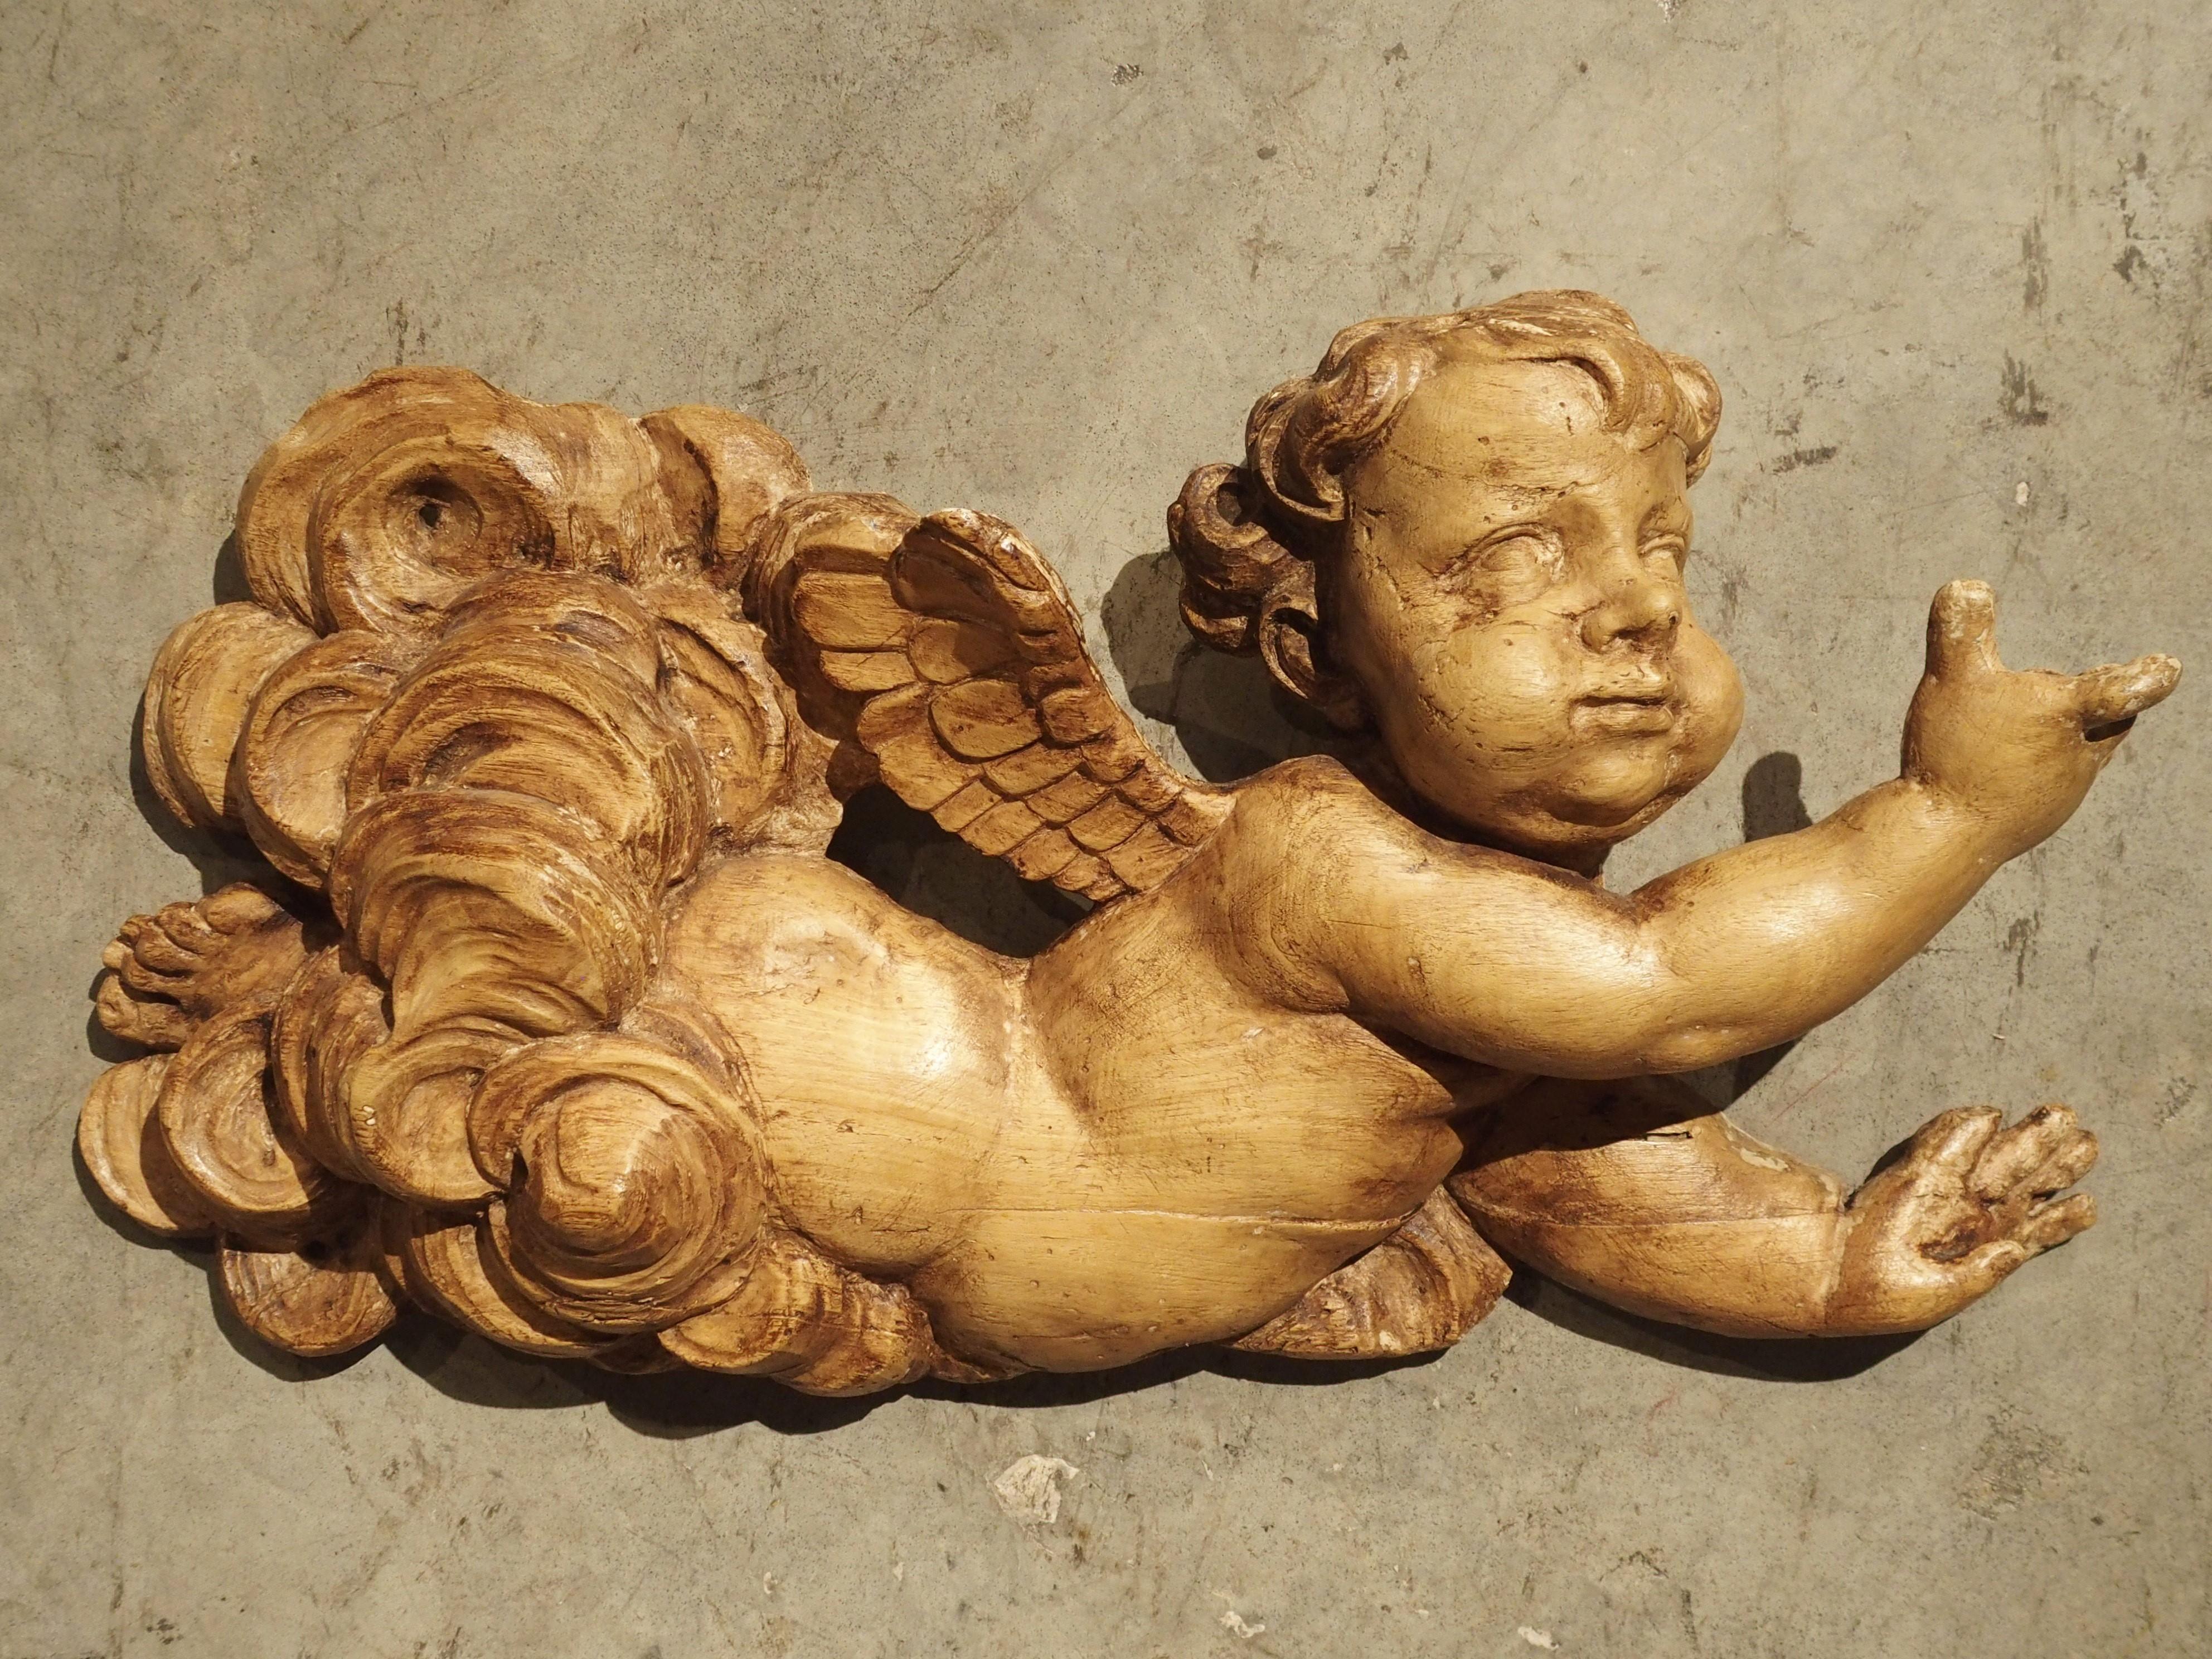 Lightweight and intricately carved, this sculpture depicts a small, winged cherub flying through wispy clouds. The sculpture was hand-carved in France during the 1700’s. The cherub was probably originally part of a larger architectural or even an